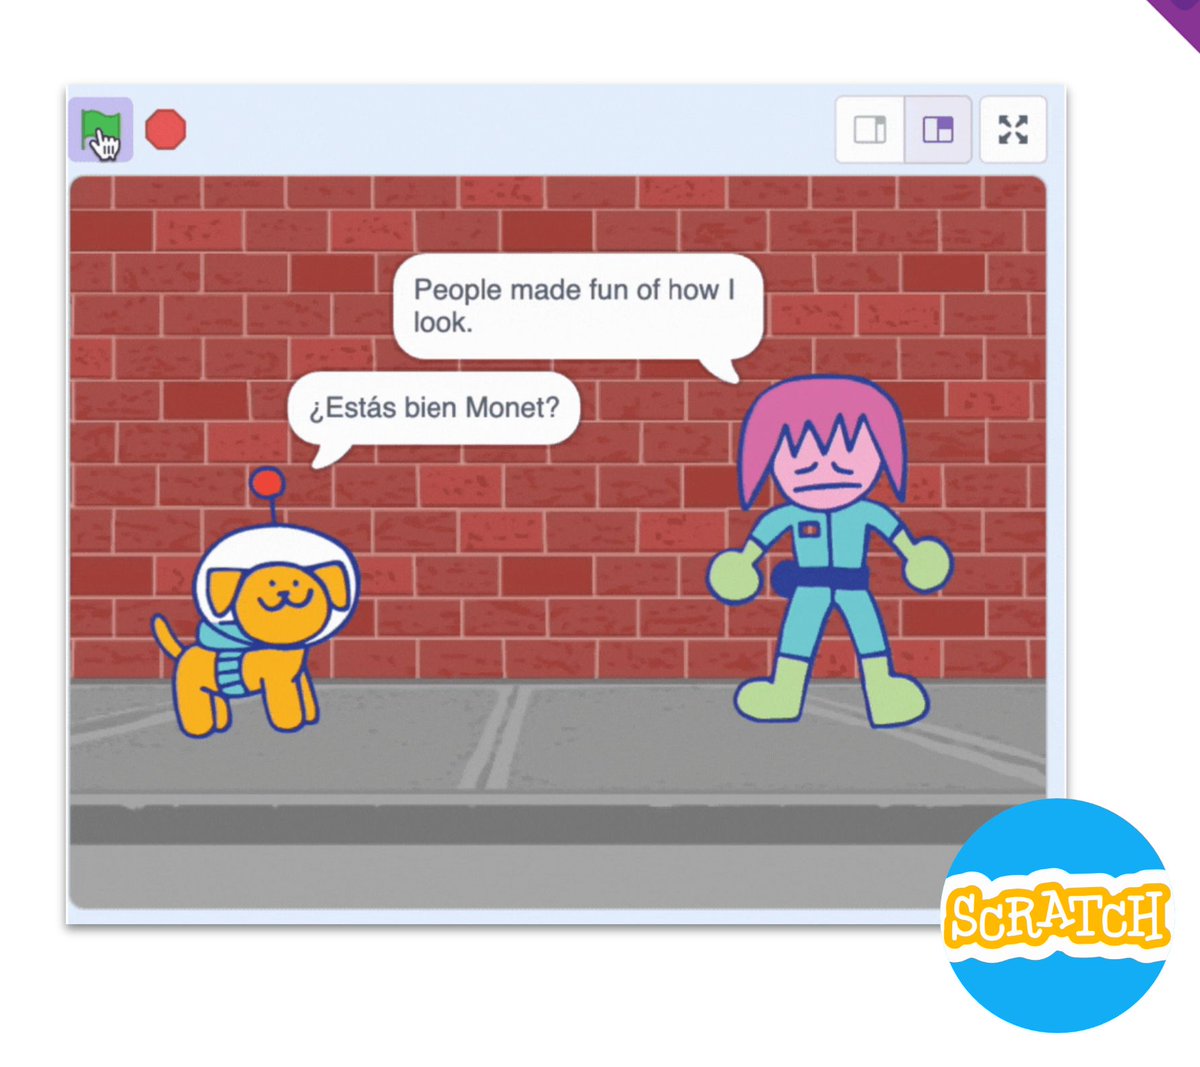 Through collaboration with the #Scratch Foundation, our team created 'Coding for a Cause' - a bilingual Scratch unit that introduces students to block programming and design thinking! ❤️ Sign up for access when it launches! buff.ly/3WvANl3 #ScratchWeek #CompEd